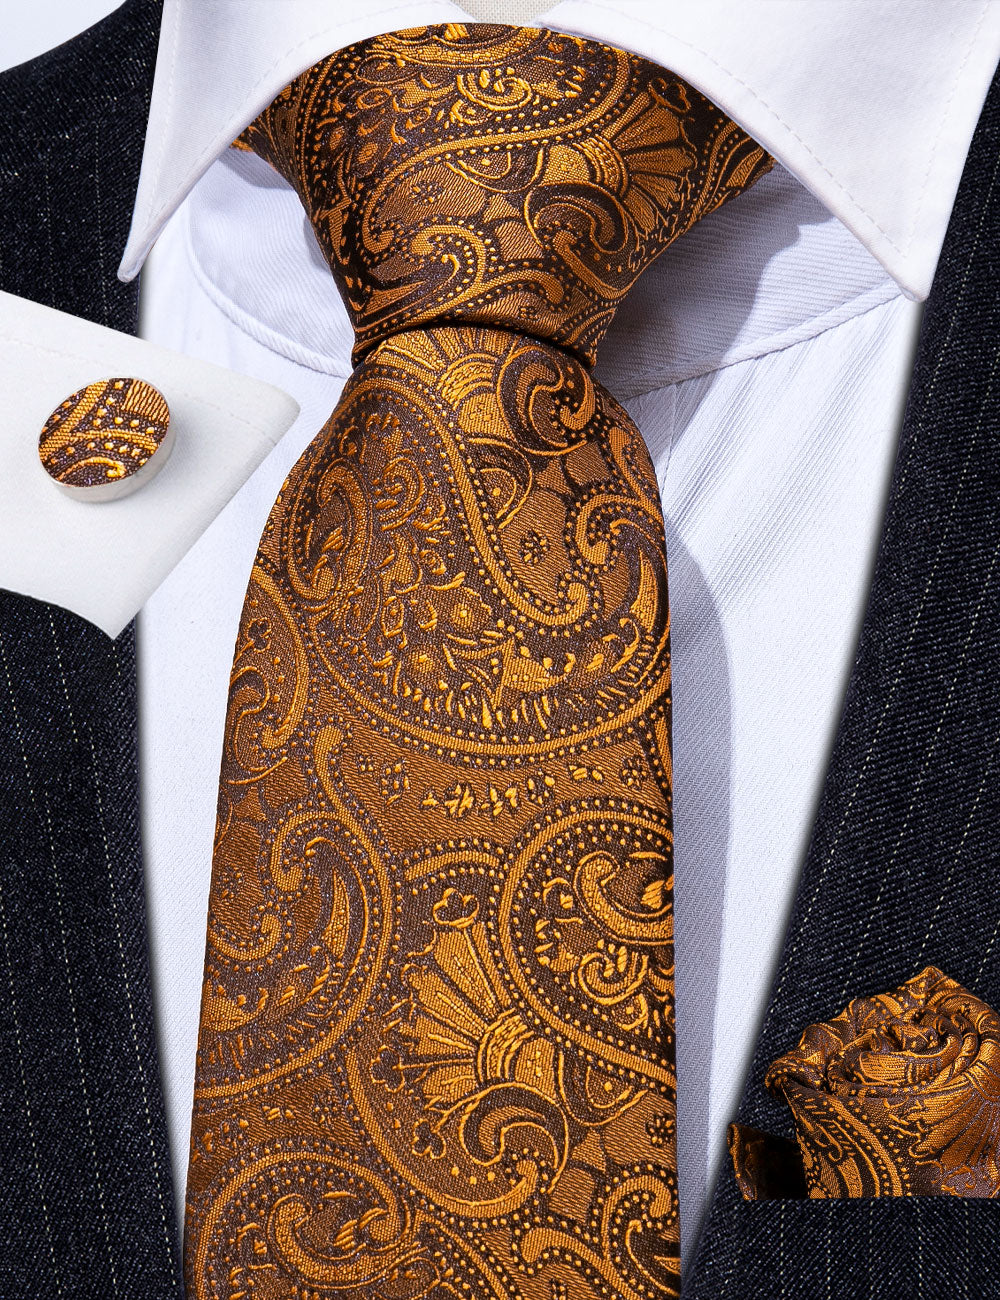 Royal Yellow Floral Tie Pocket Square Cufflinks Set